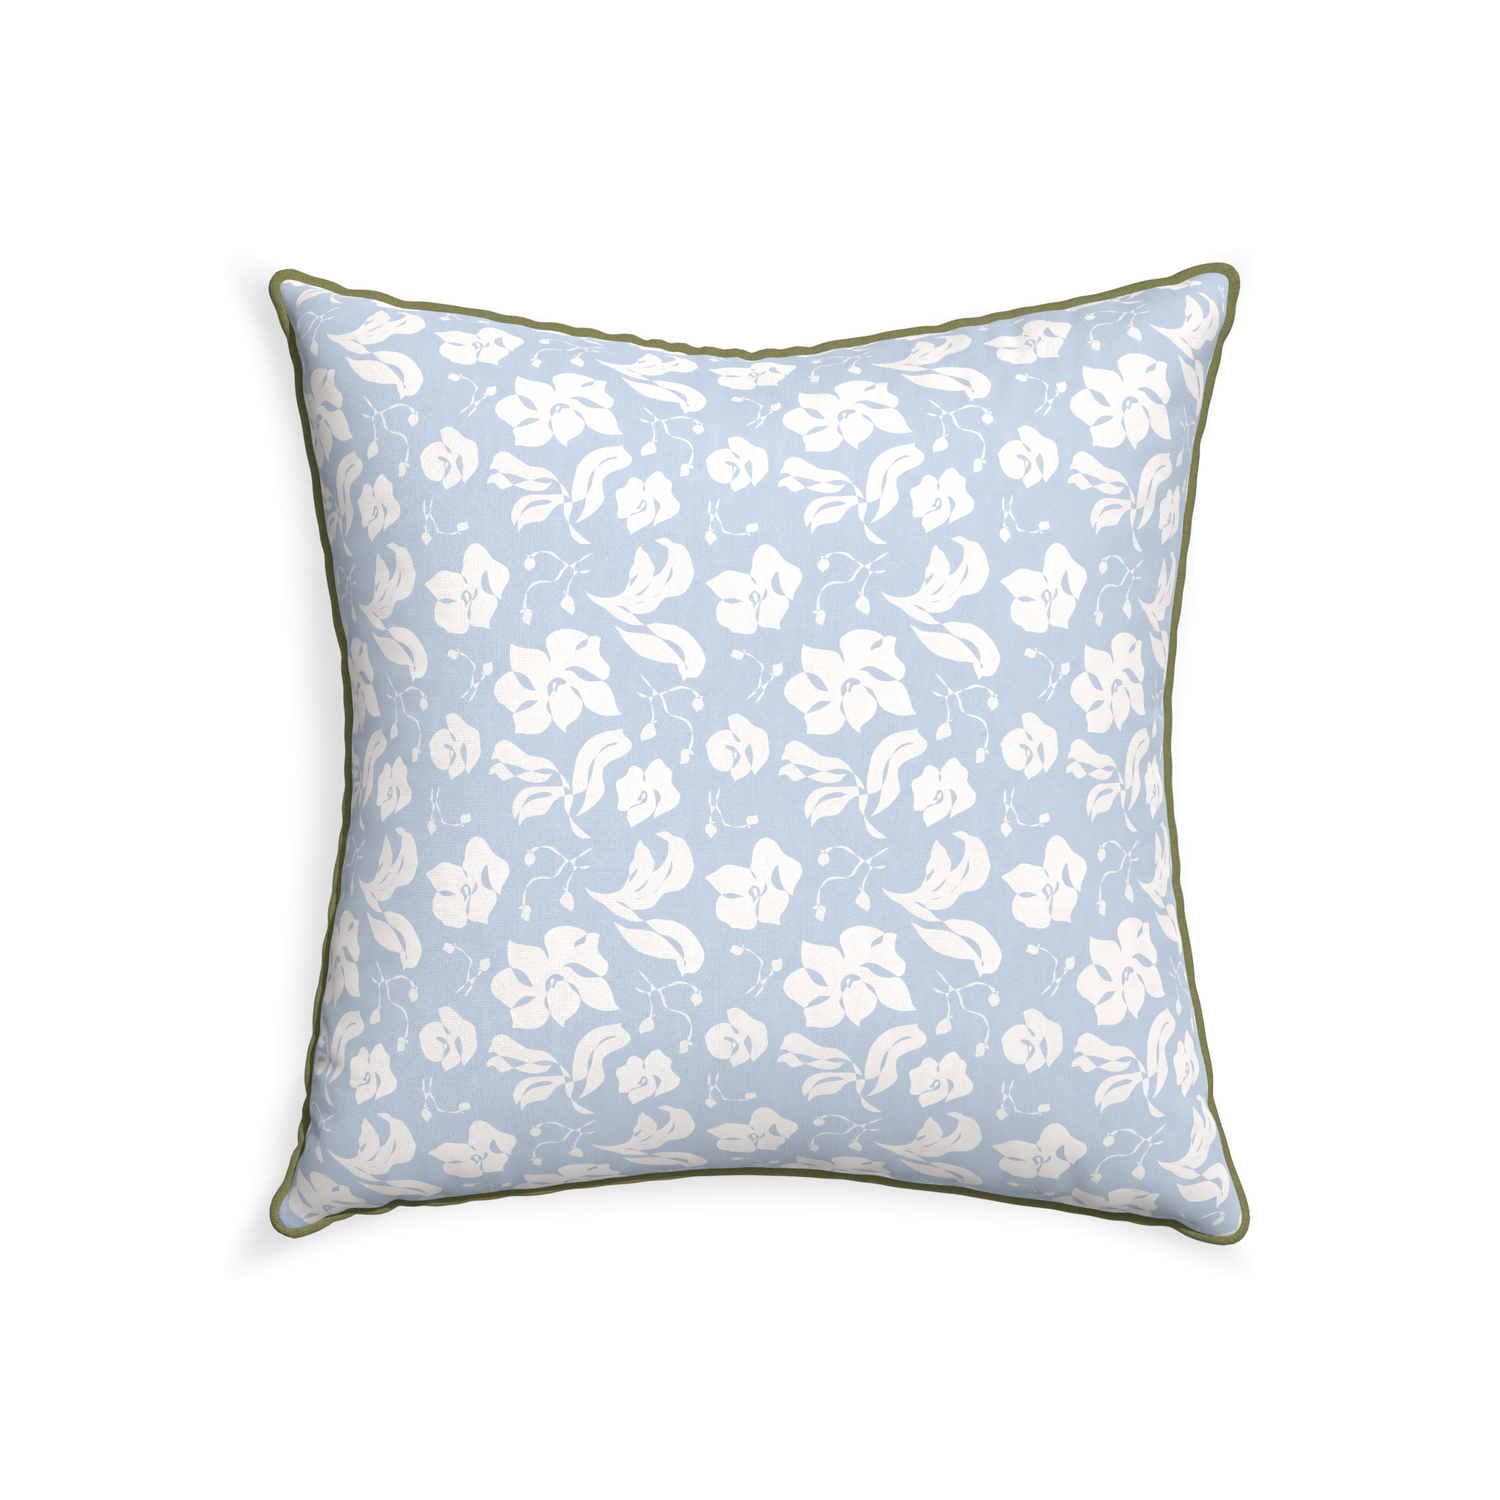 22-square georgia custom pillow with moss piping on white background